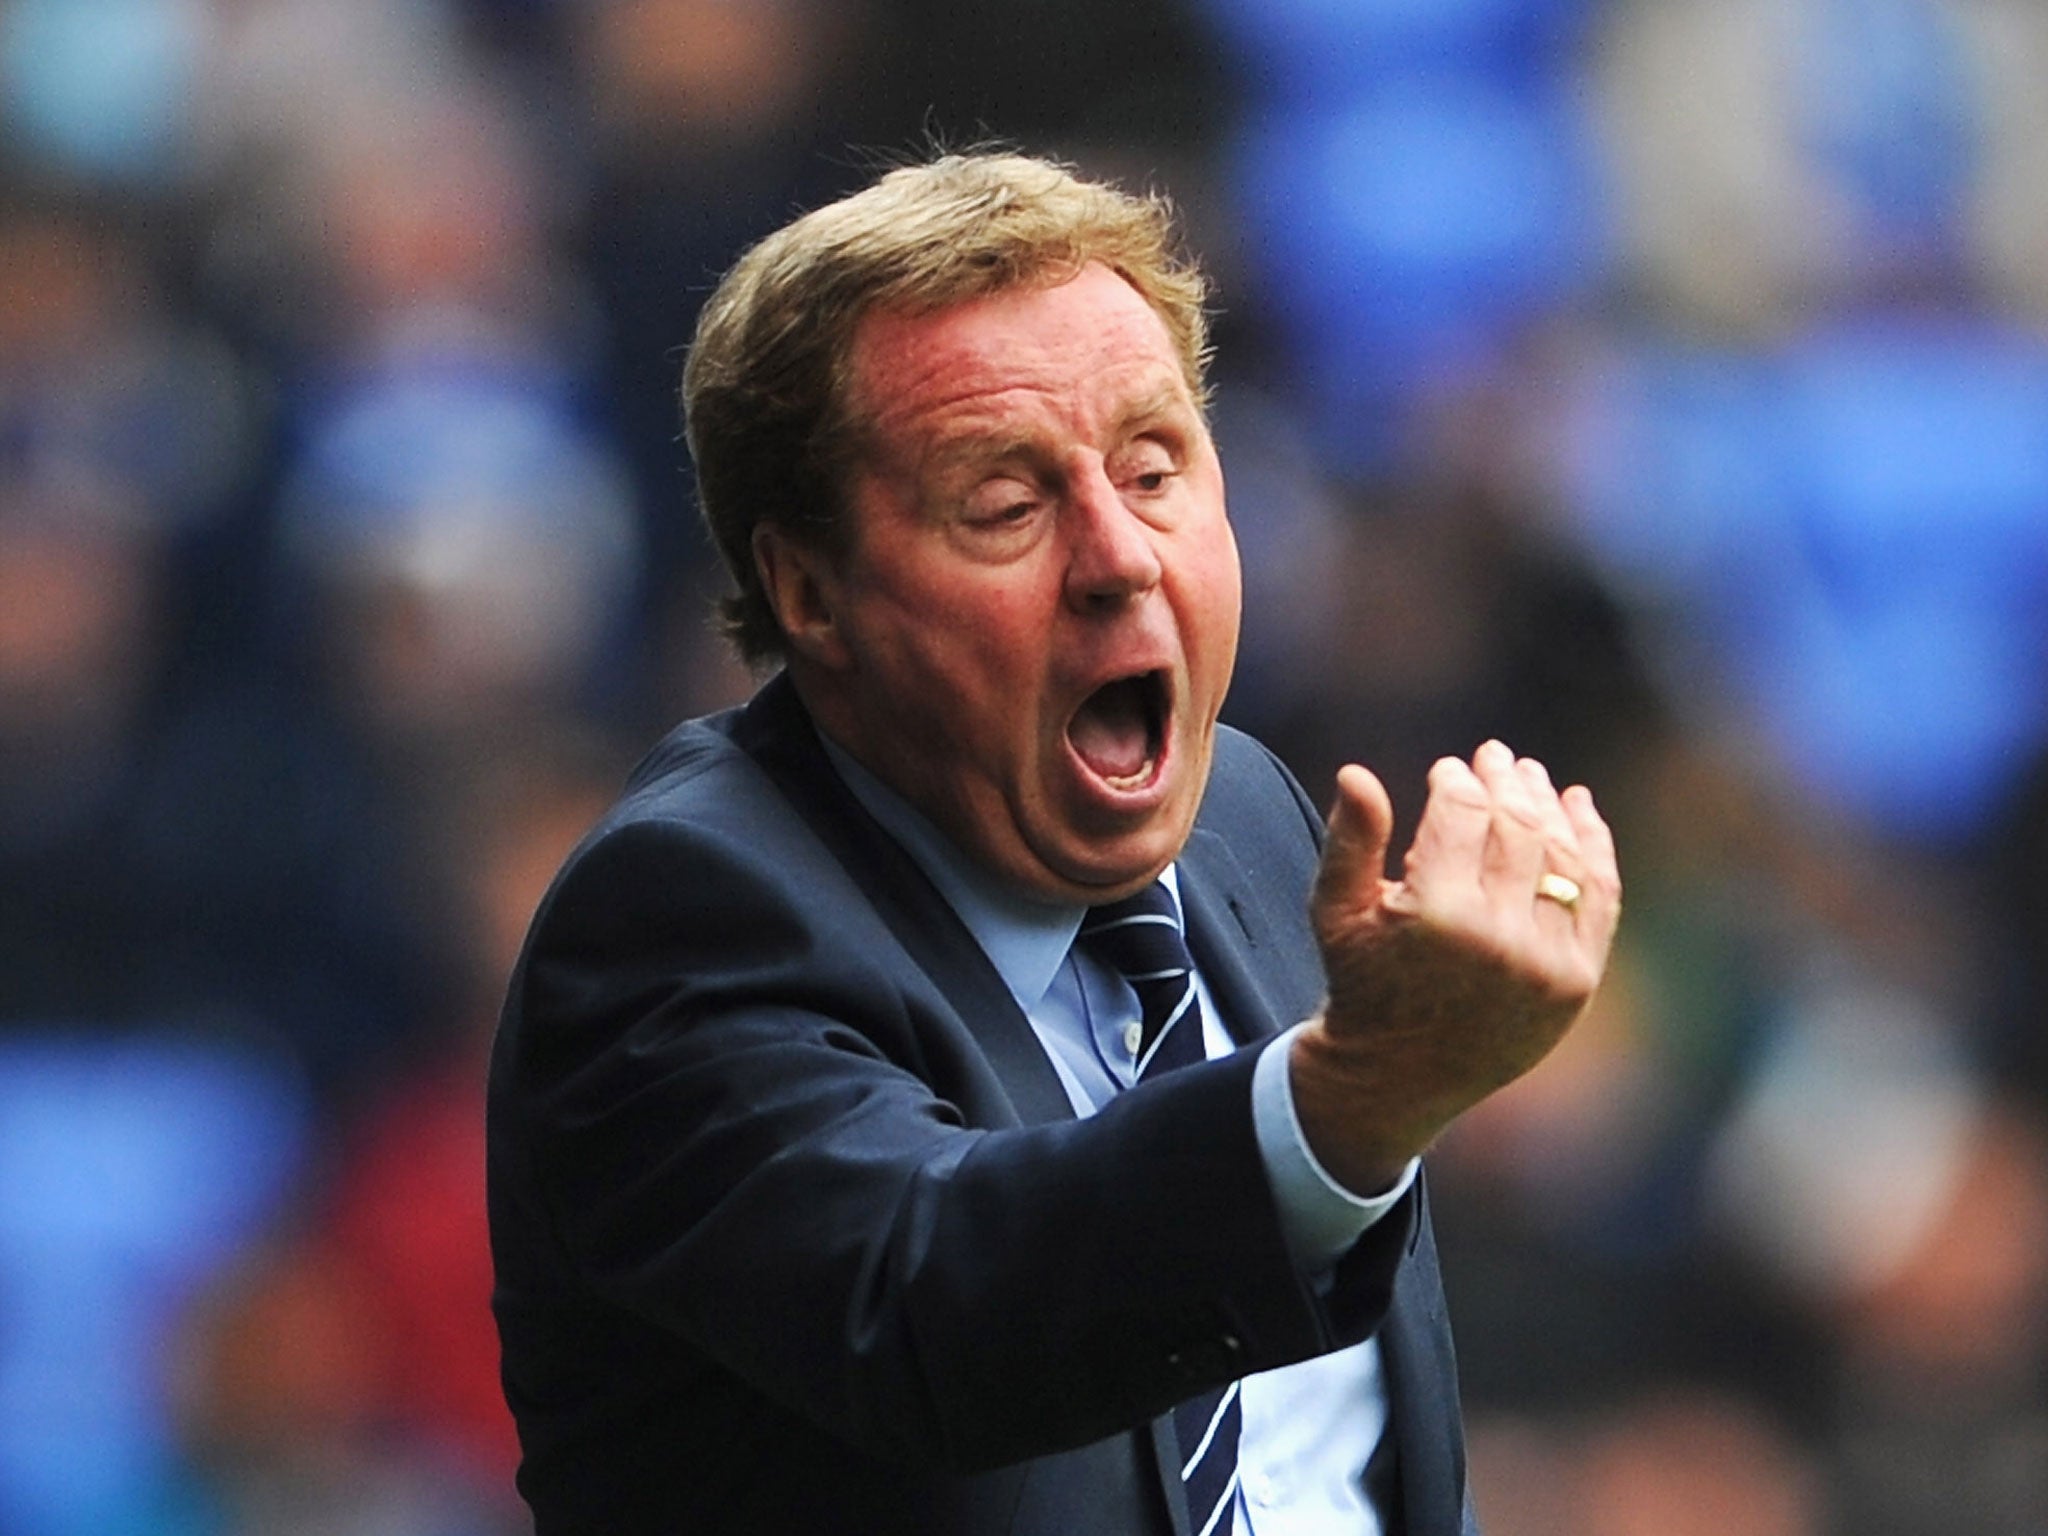 Harry Redknapp claims he can hardly write. He's certainly not the author of a "tomb"